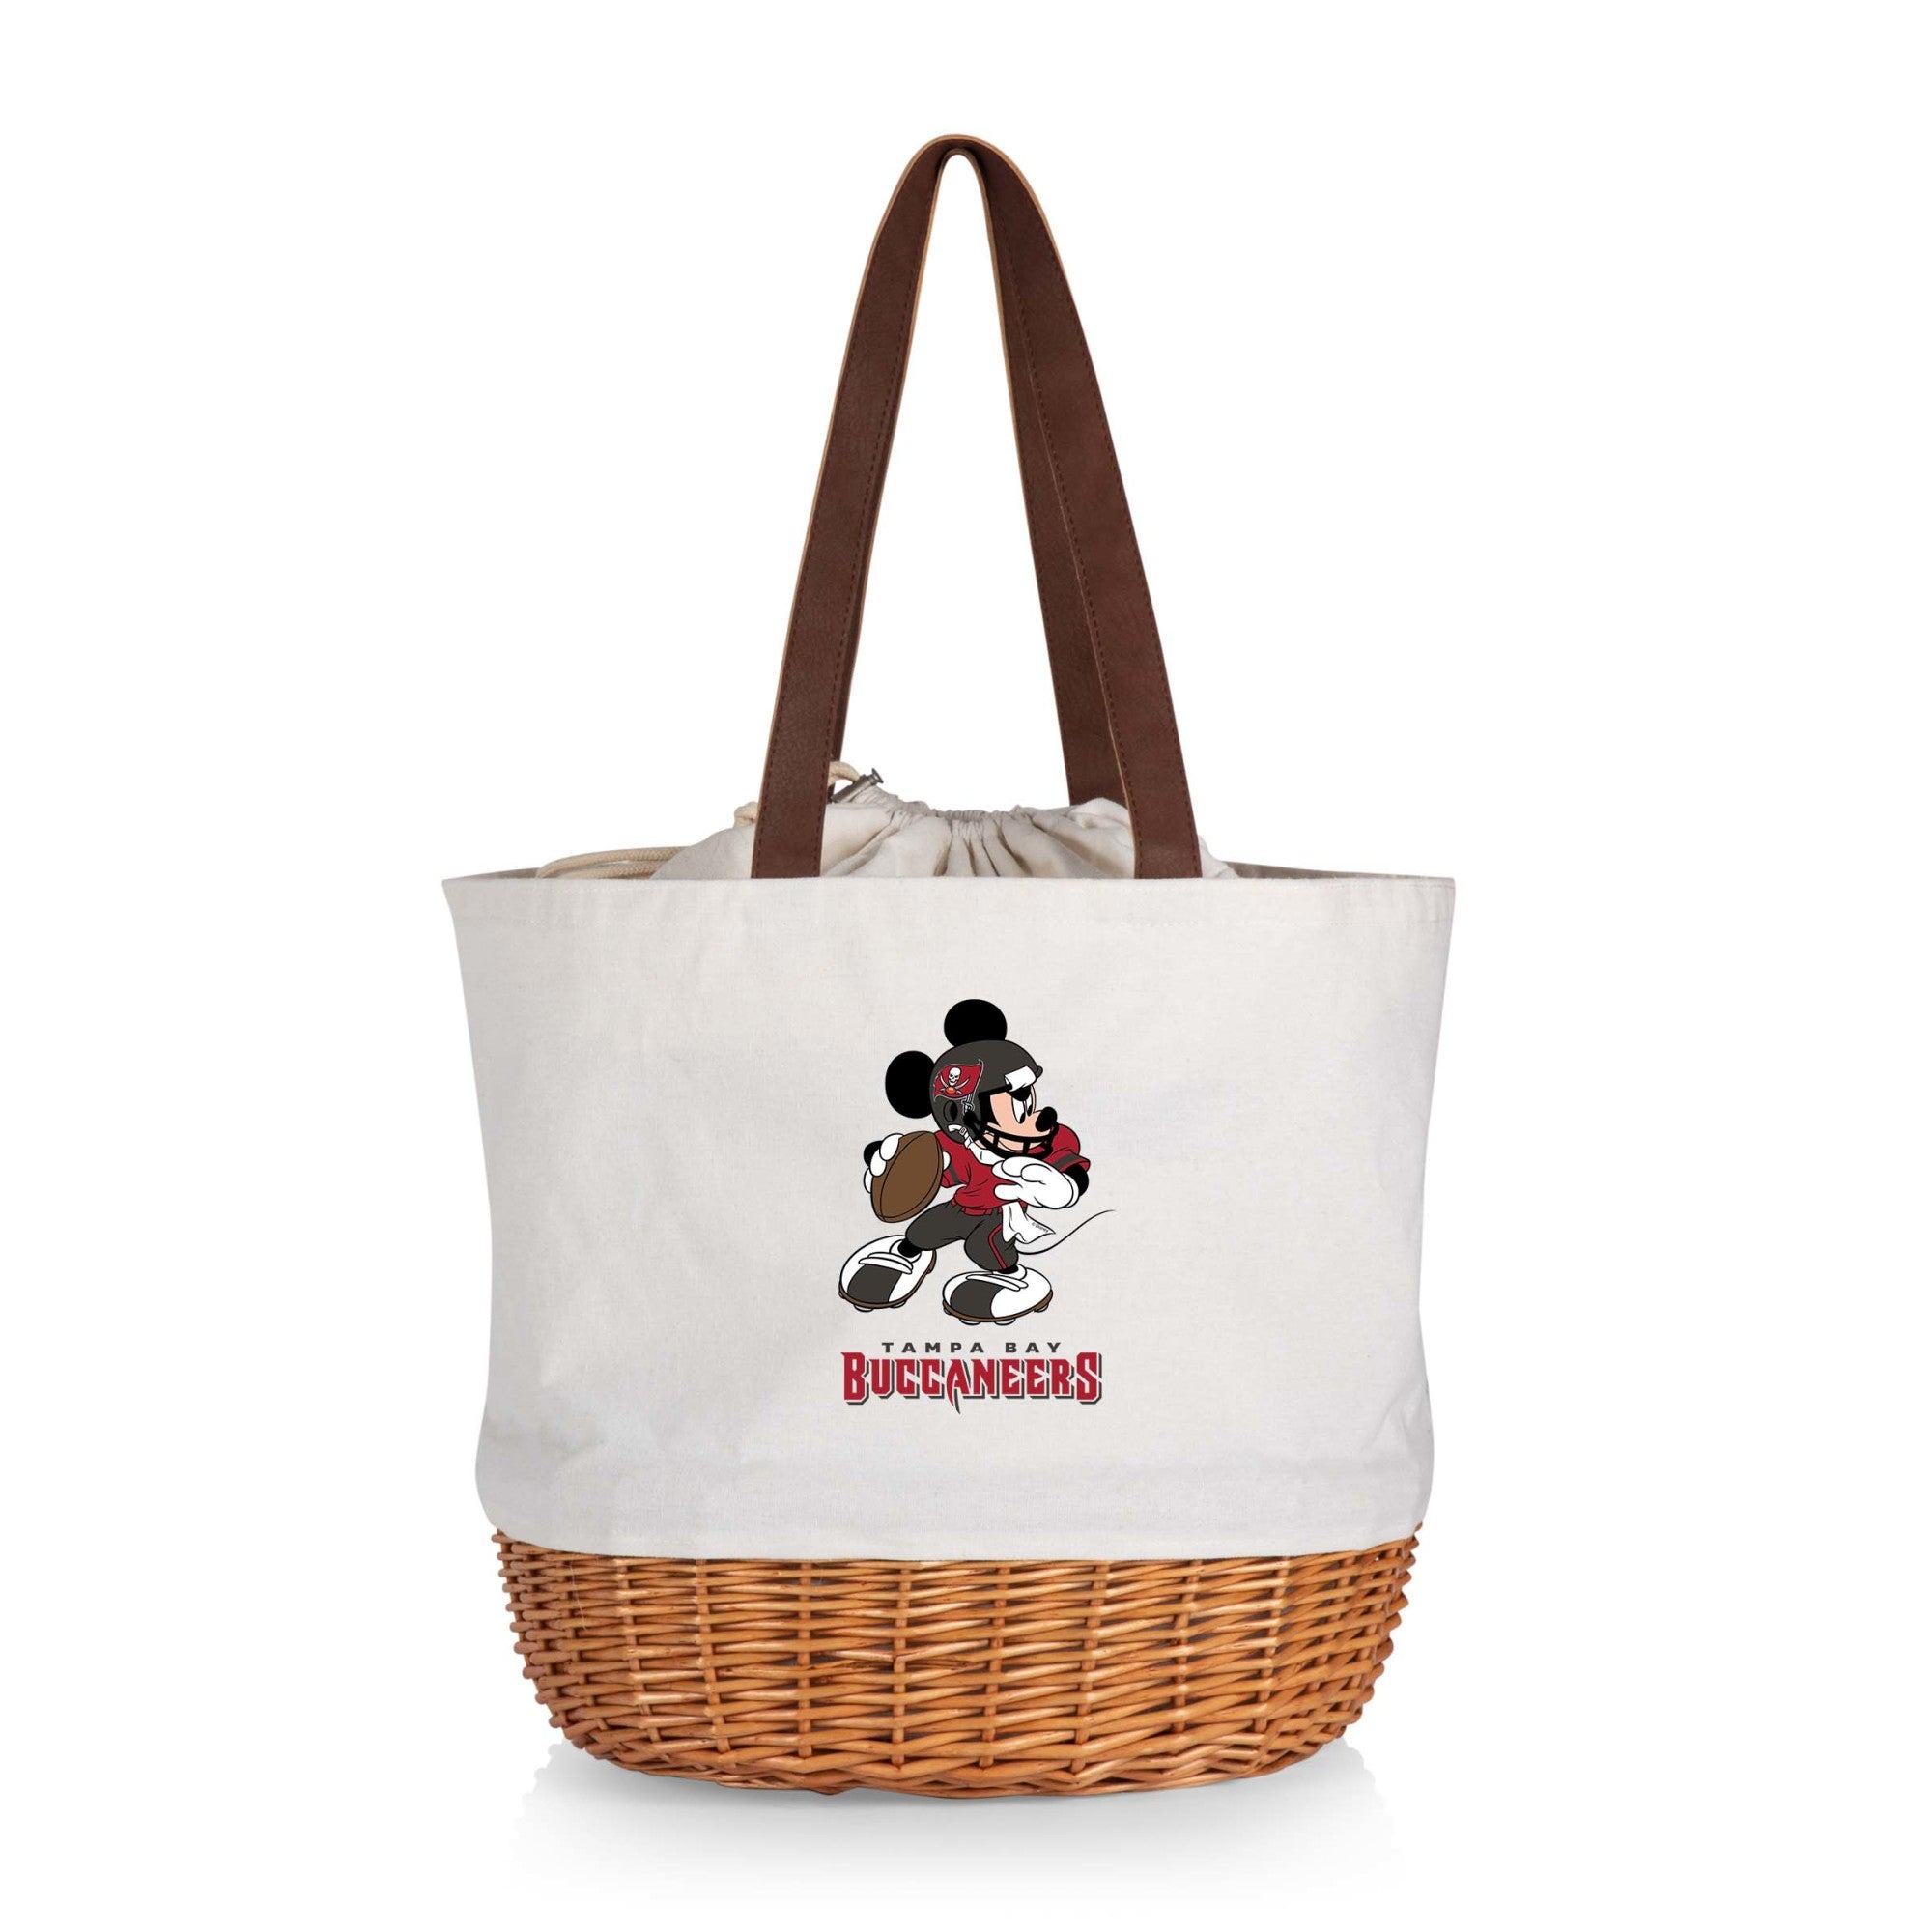 Mickey Mouse - Tampa Bay Buccaneers - Coronado Canvas and Willow Basket Tote